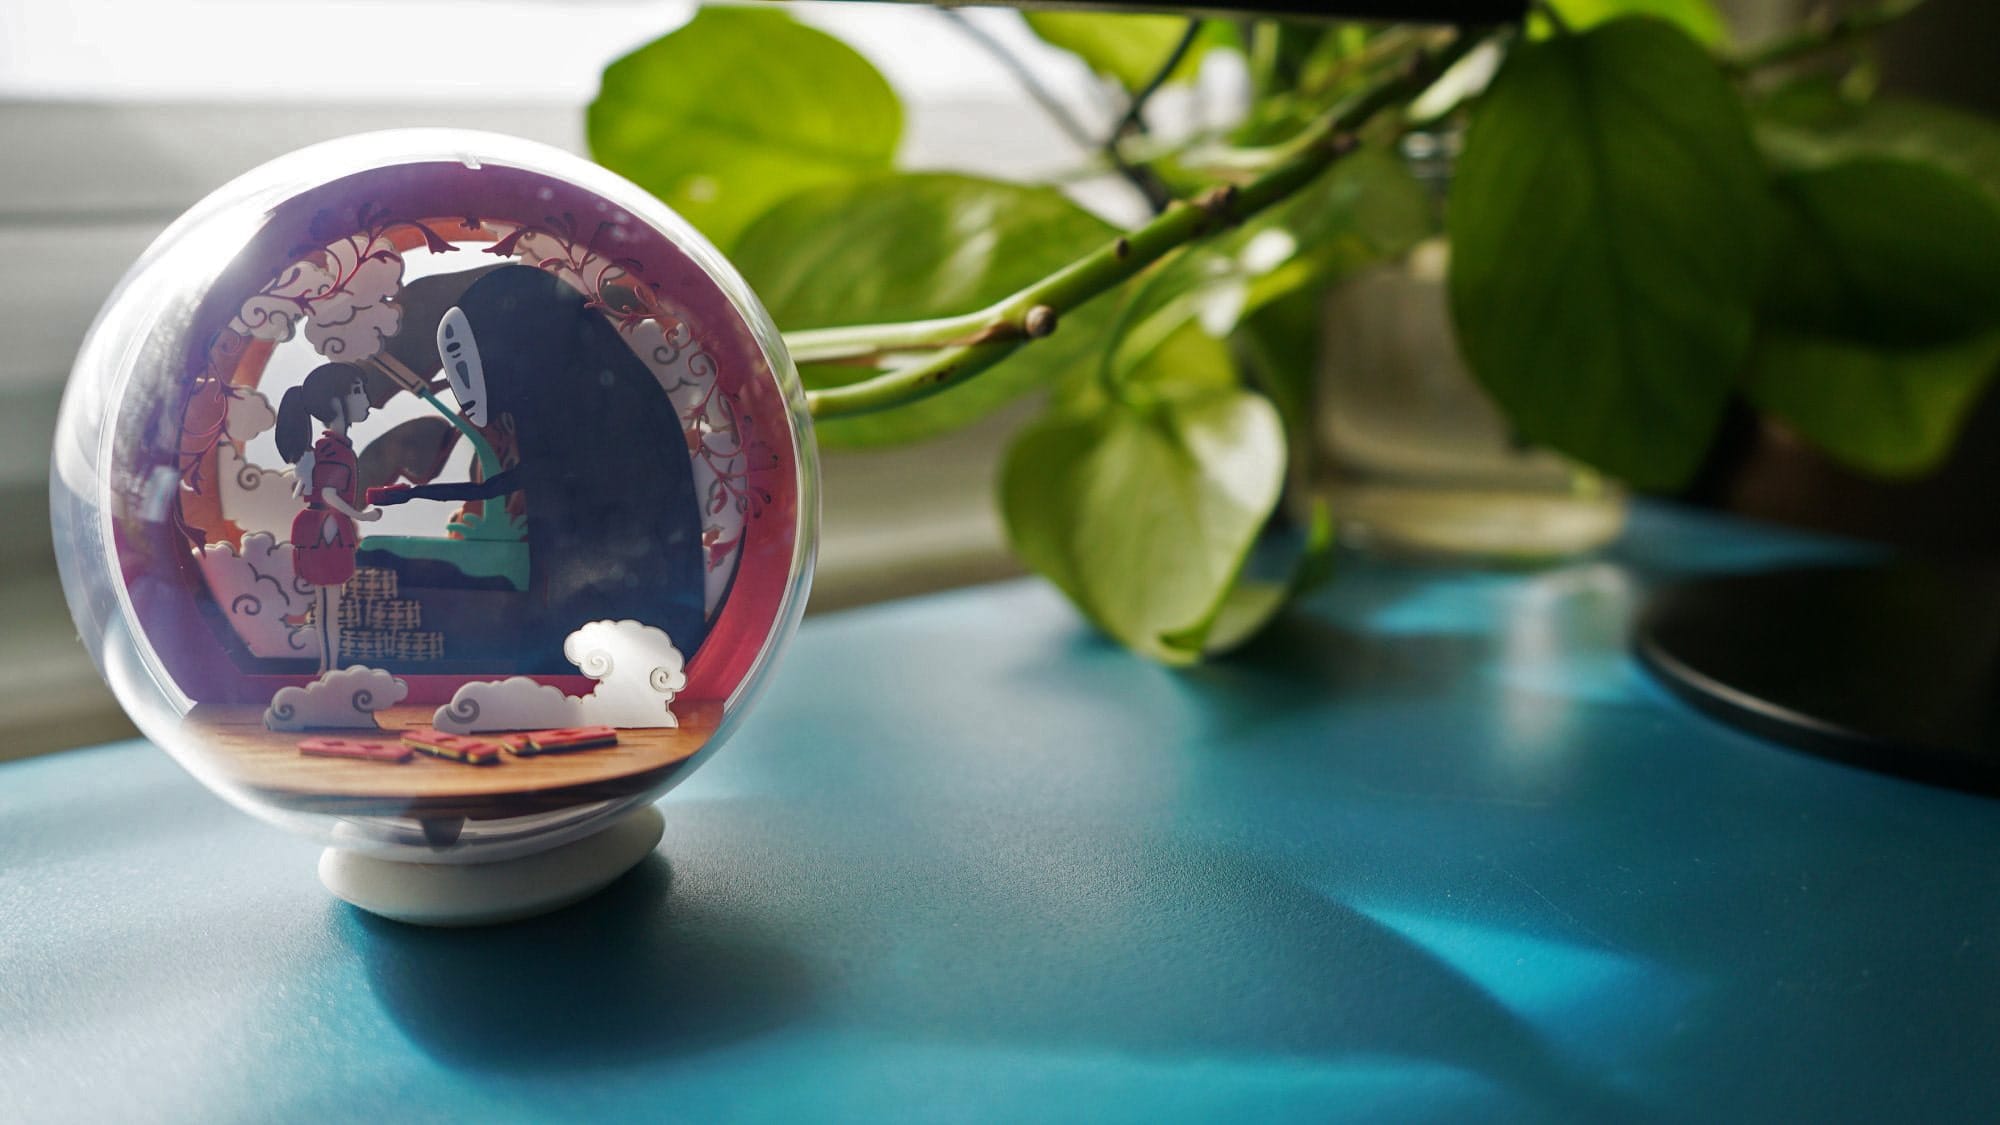 A snow globe on a desk with a scenic depiction inside, next to a green potted plant in soft light